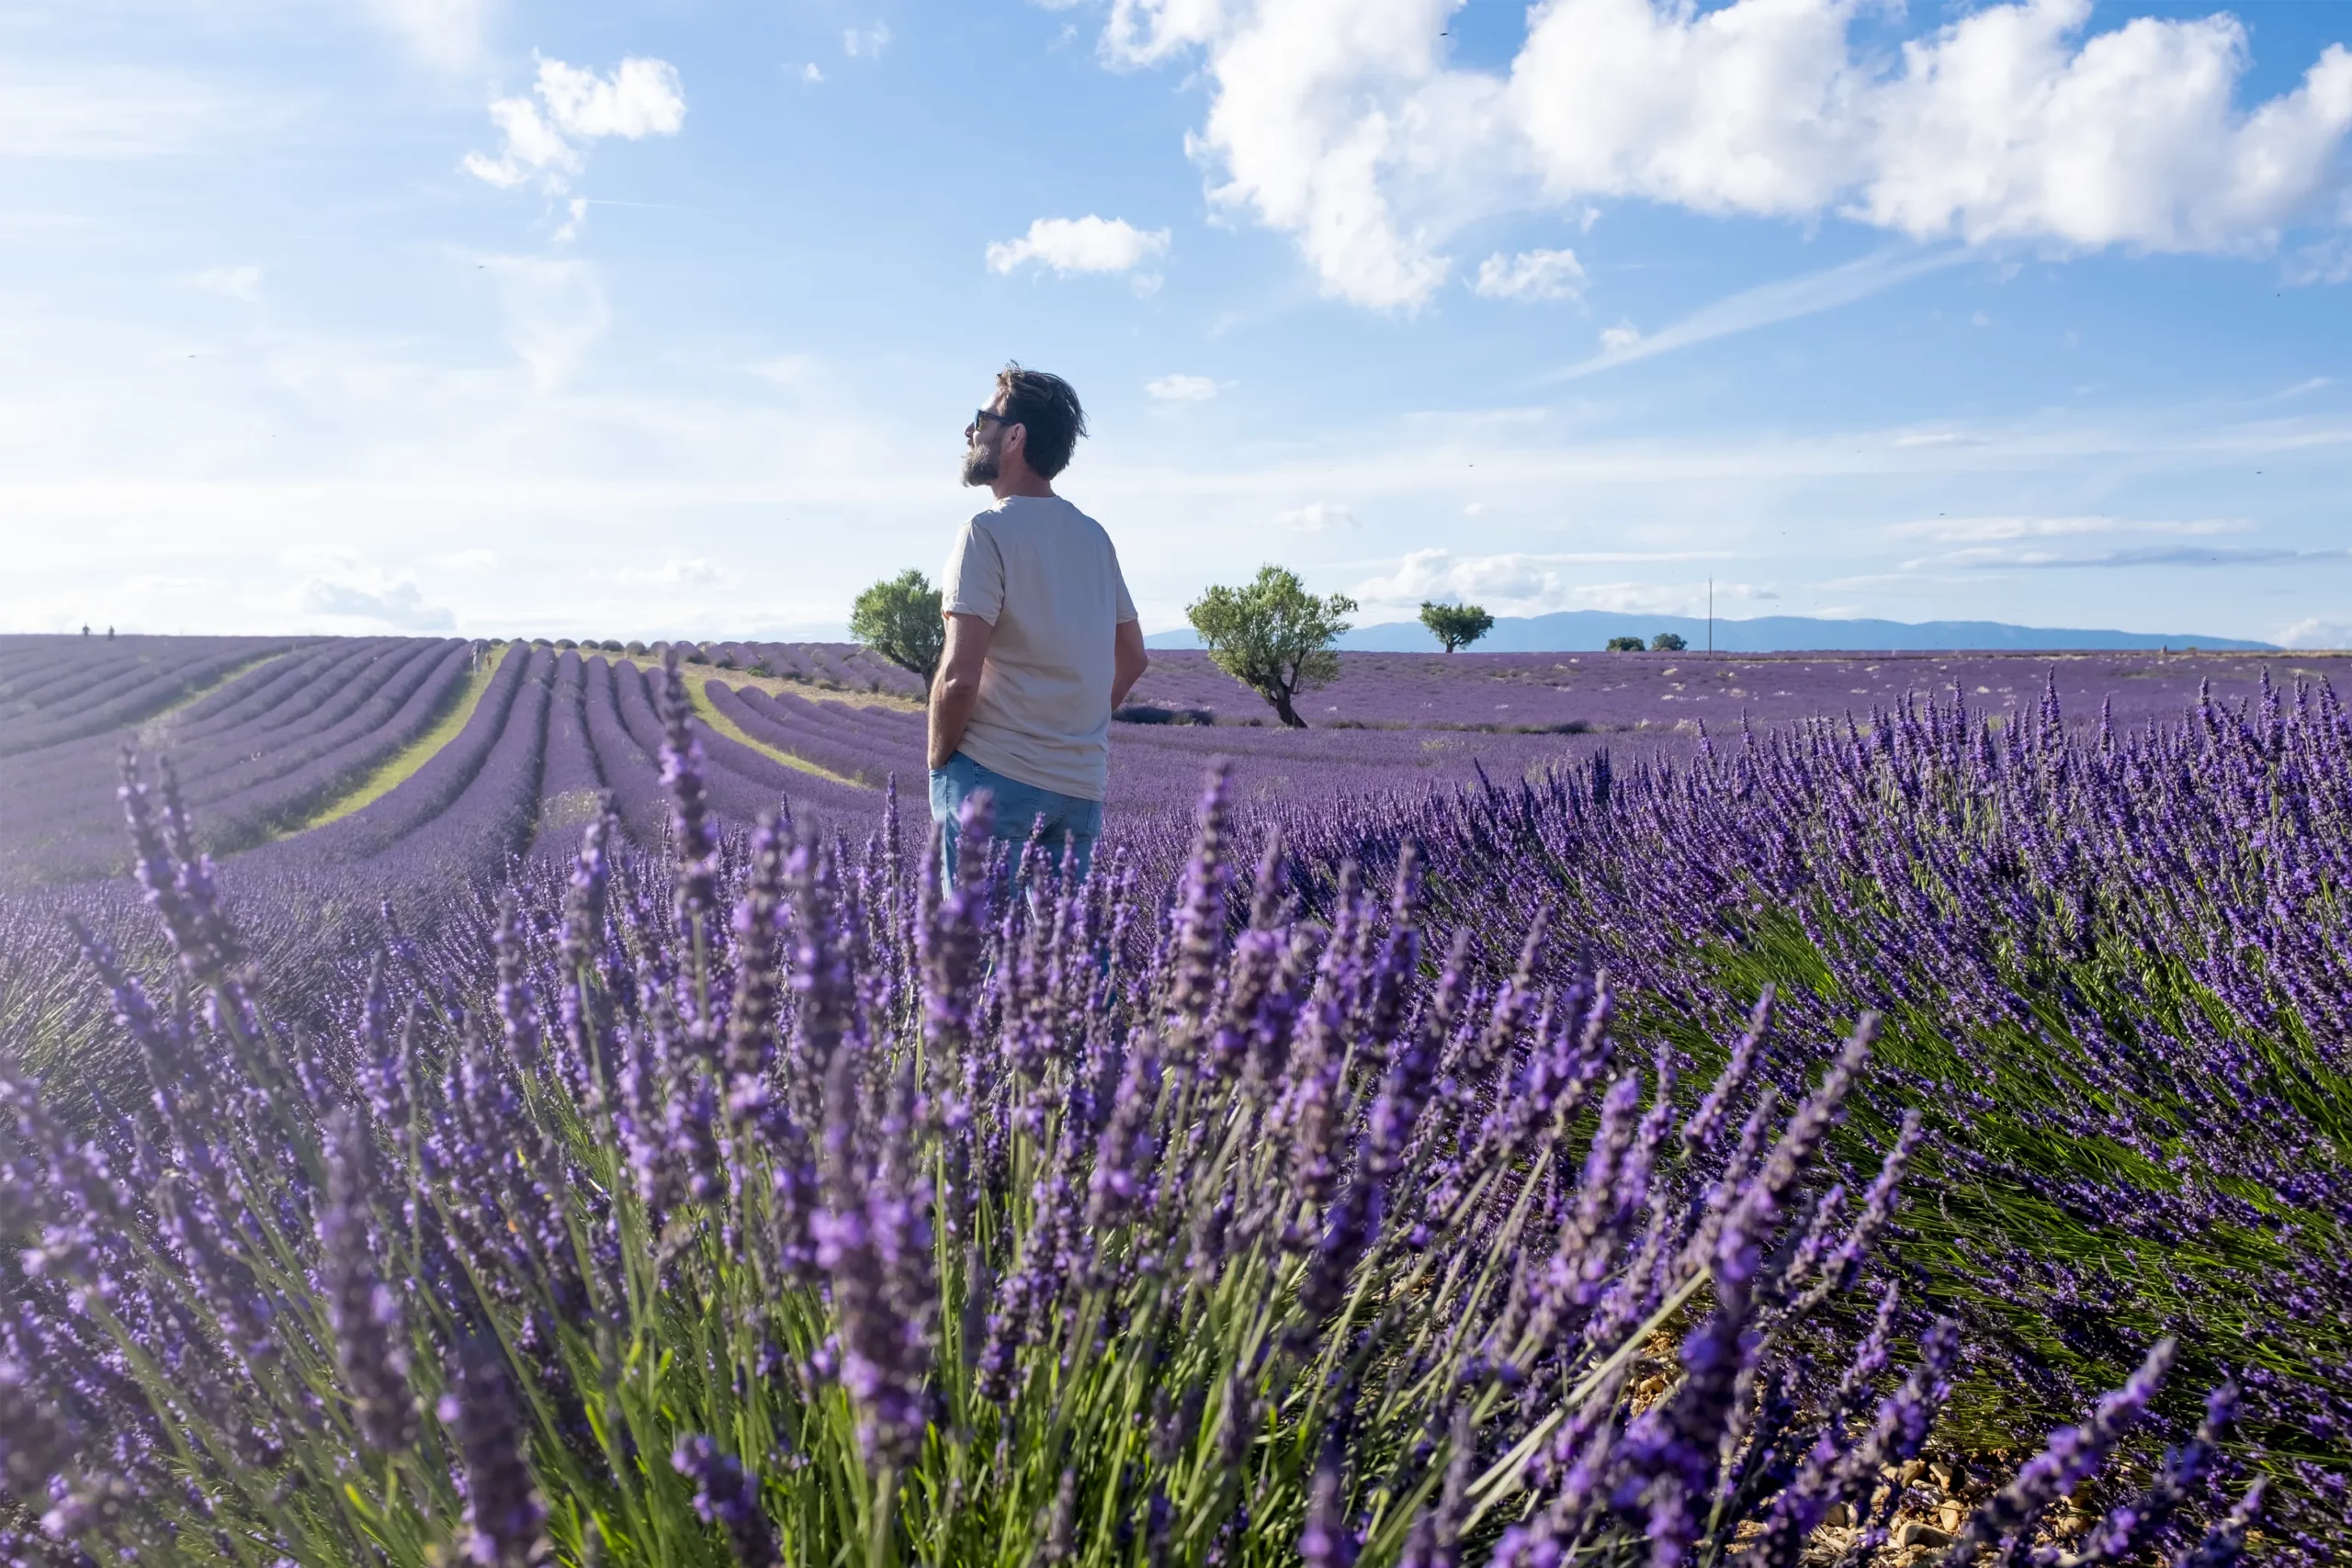 man-tourist-standing-in-the-middle-of-lavender-fie-2022-04-14-16-22-15-utc copie